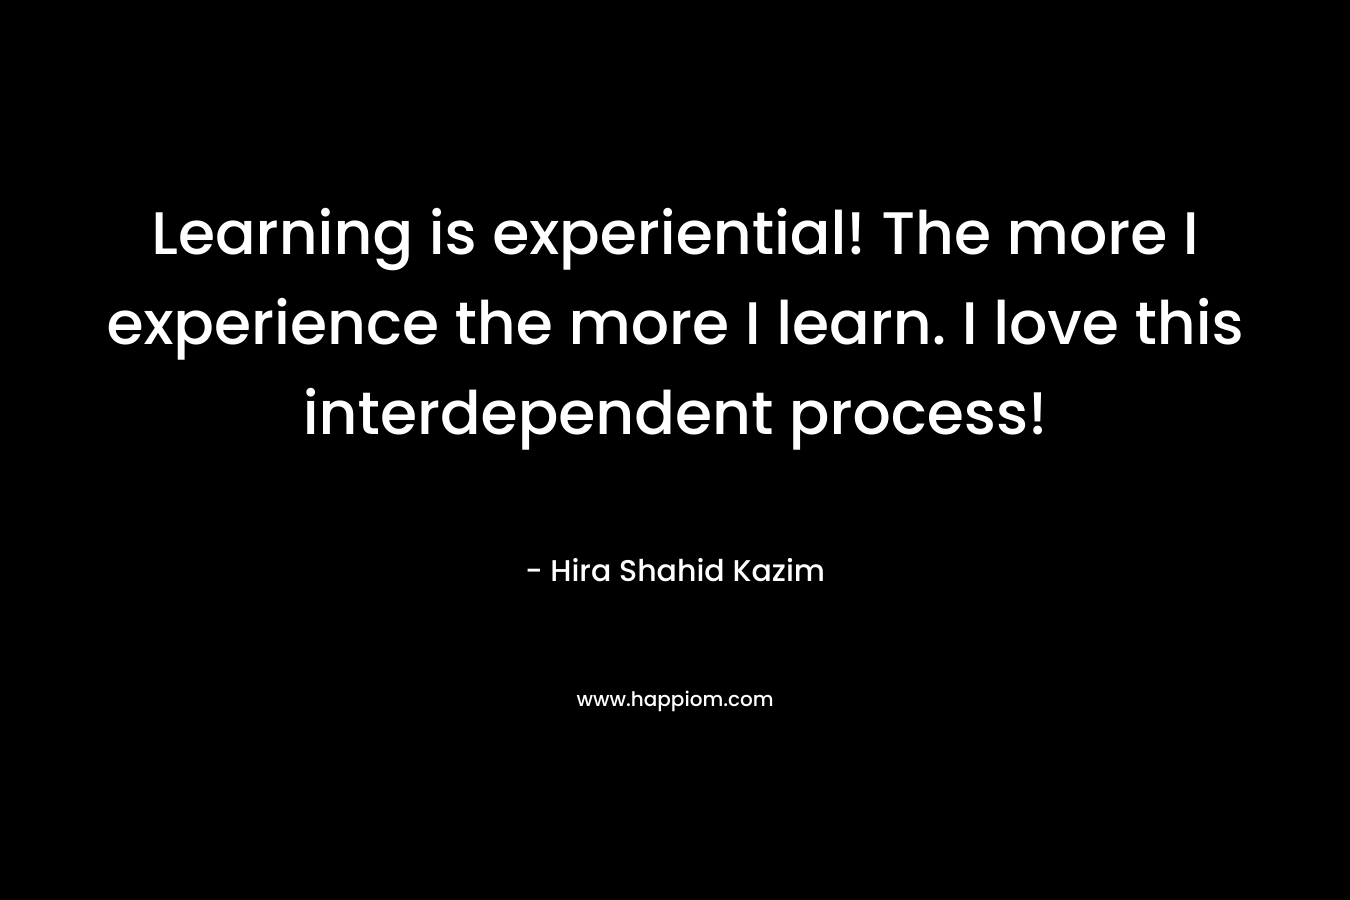 Learning is experiential! The more I experience the more I learn. I love this interdependent process! – Hira Shahid Kazim